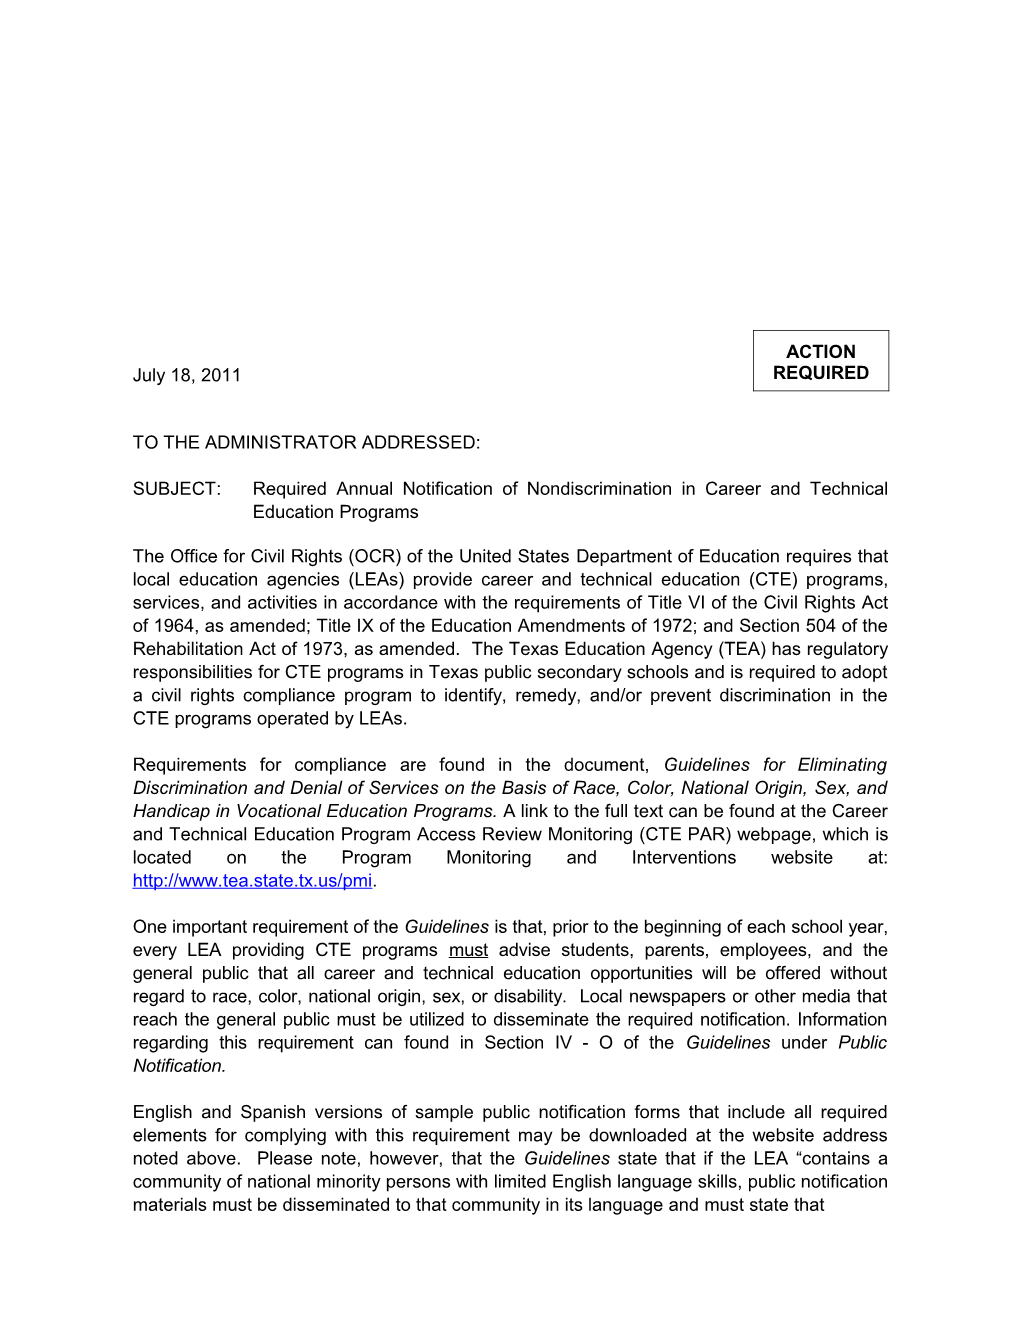 SUBJECT: Required Annual Notification of Nondiscrimination in Career and Technical Education